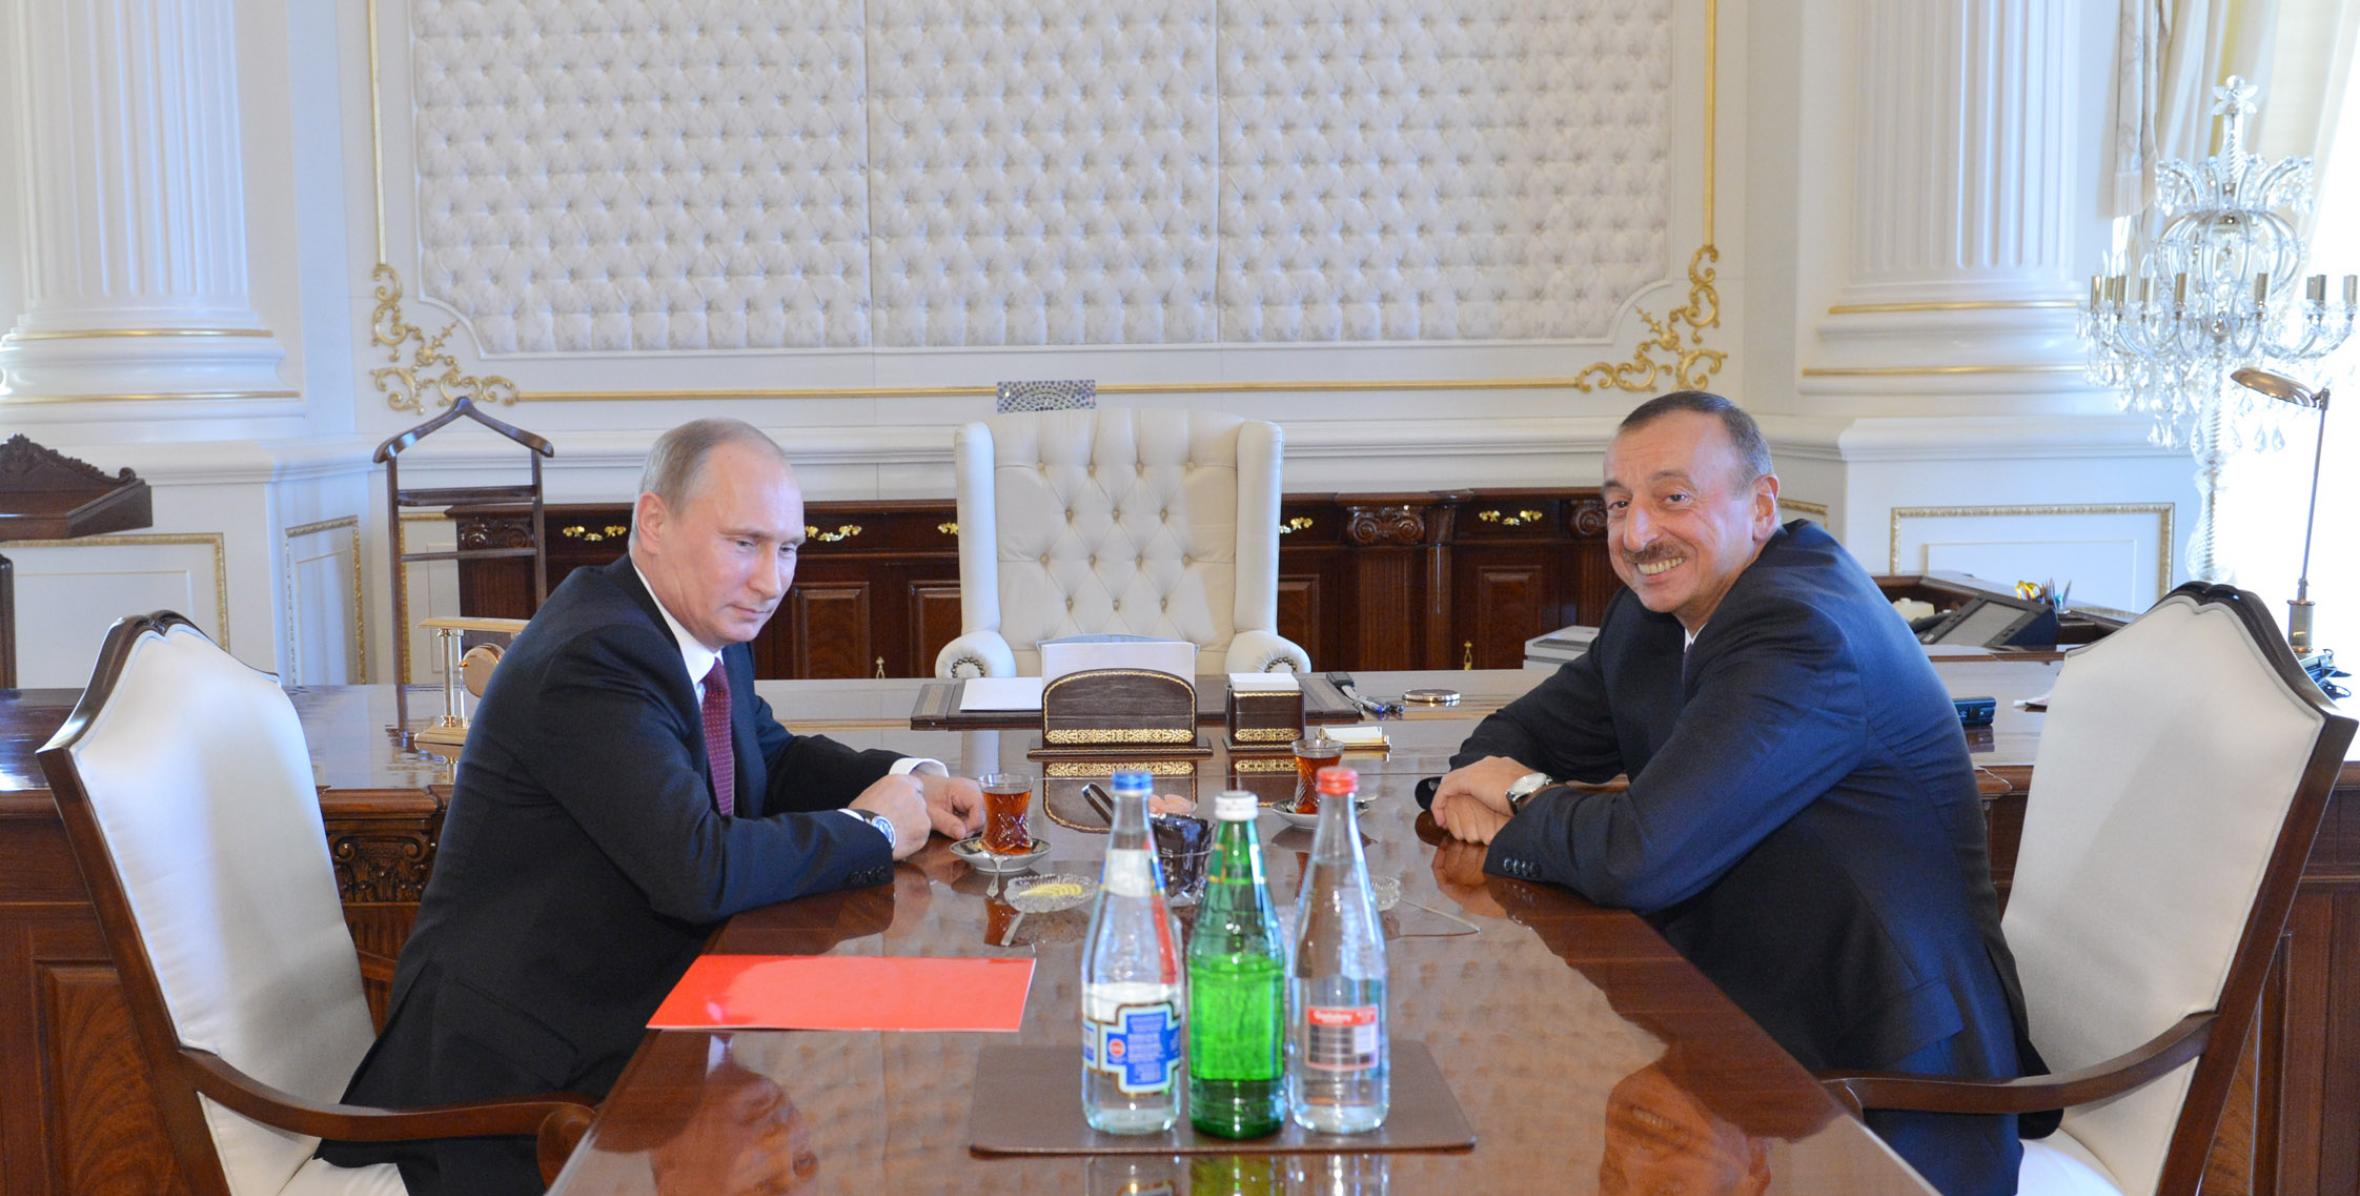 Ilham Aliyev and Russian President Vladimir Putin held a meeting at the President’s office